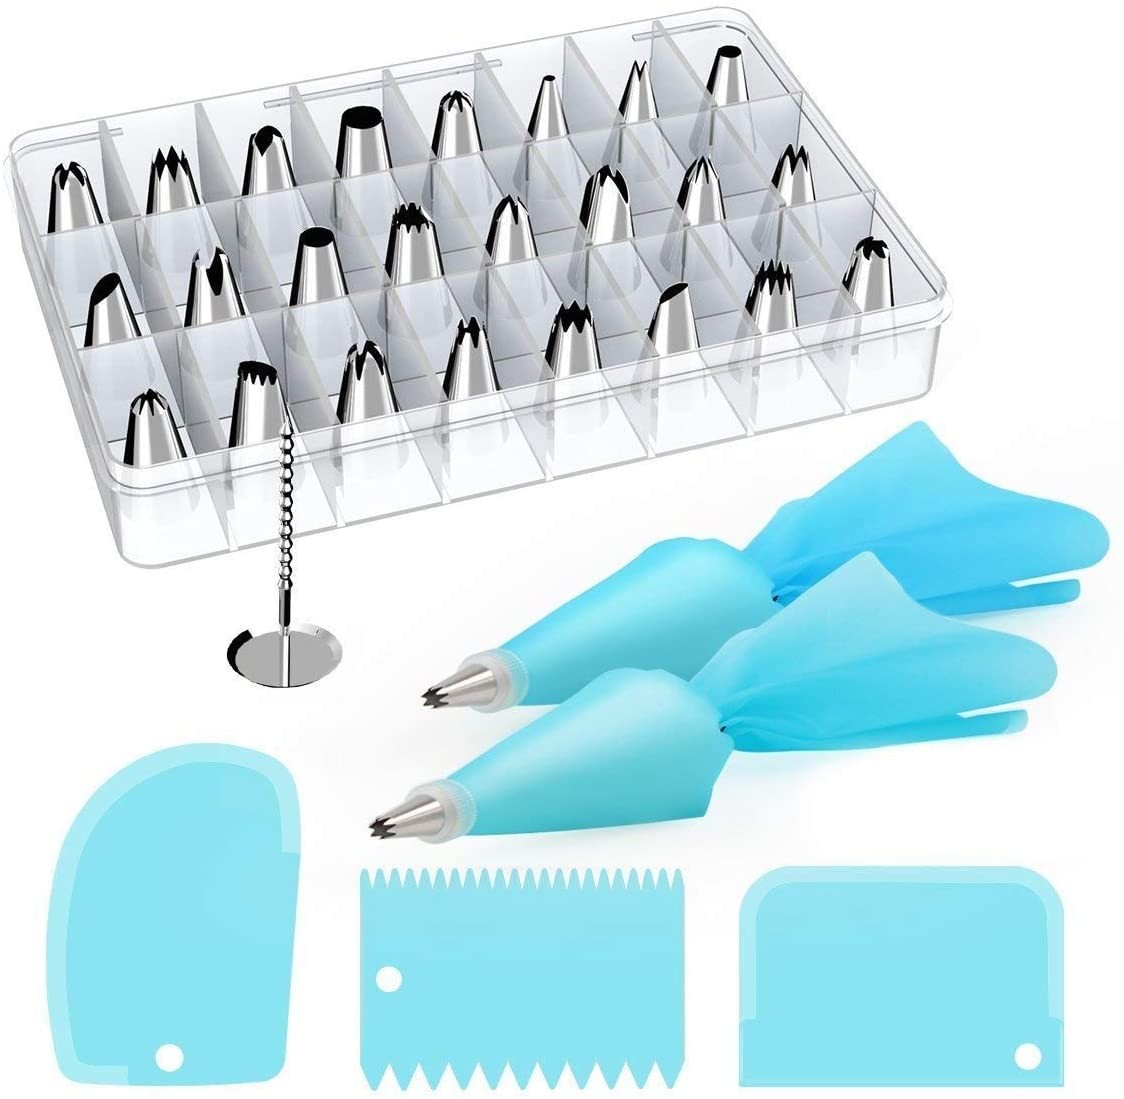 Cake Decorating Supplies Tips Kit 32Pcs Stainless Steel Baking Tools and Accessories